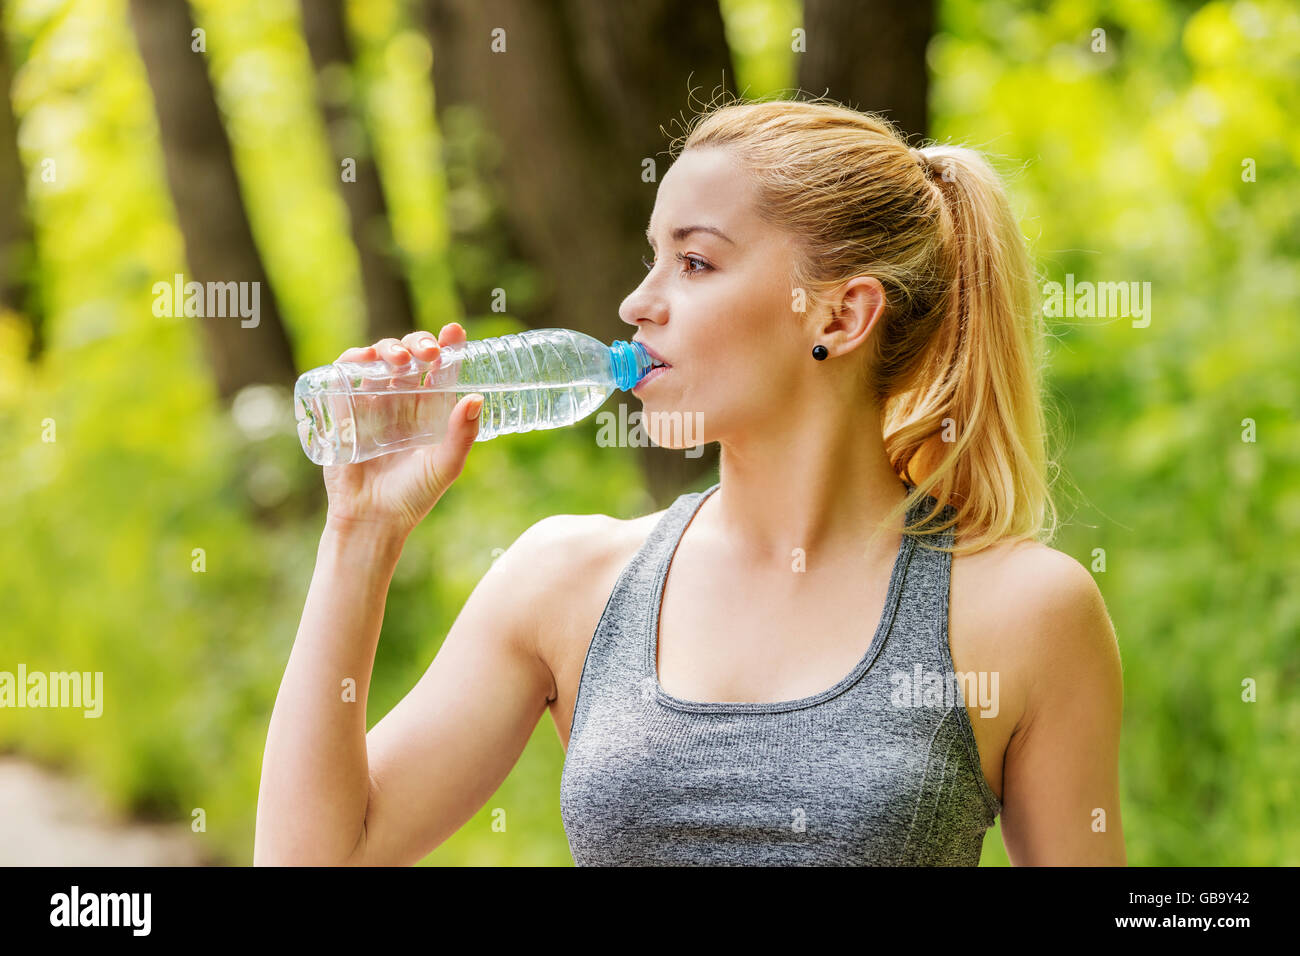 Sporty woman drinking water. Stock Photo